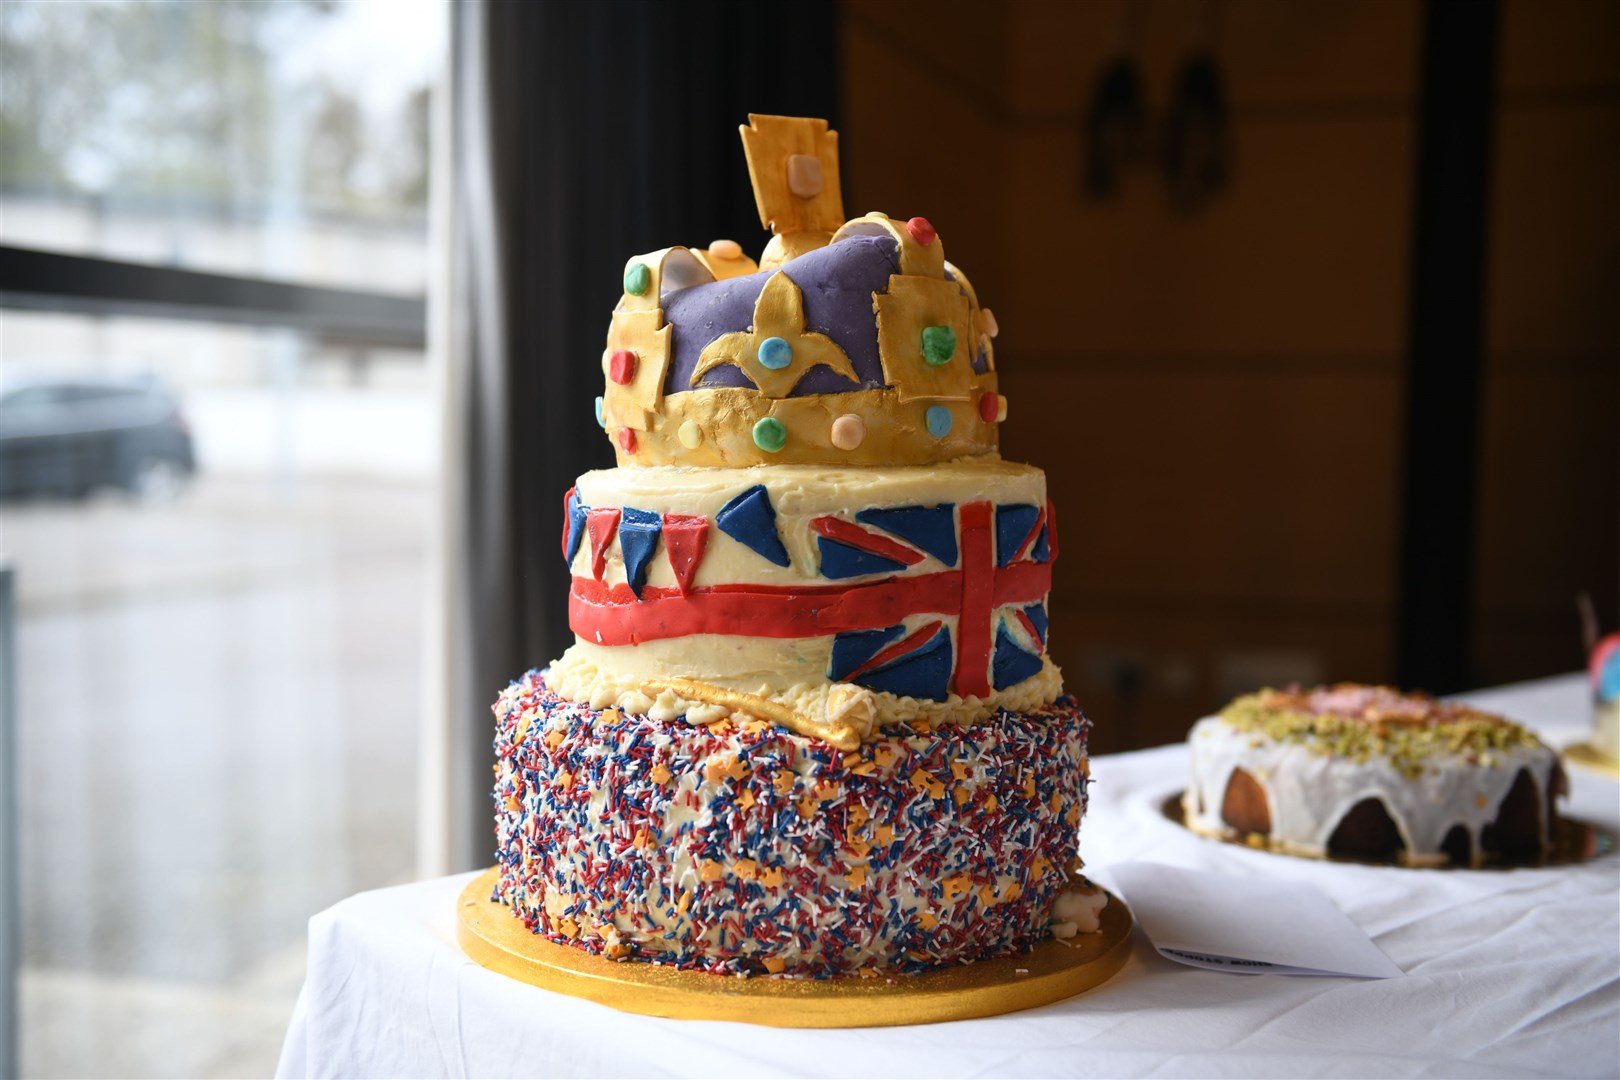 Dingwall is set to celebrate the Coronation on Sunday with a free lunch for the over 60s. Pictured here is Sarah Hollifield's Coronation Carrot cake which won the adult Cake Showstopper Competition. Picture: James Mackenzie.